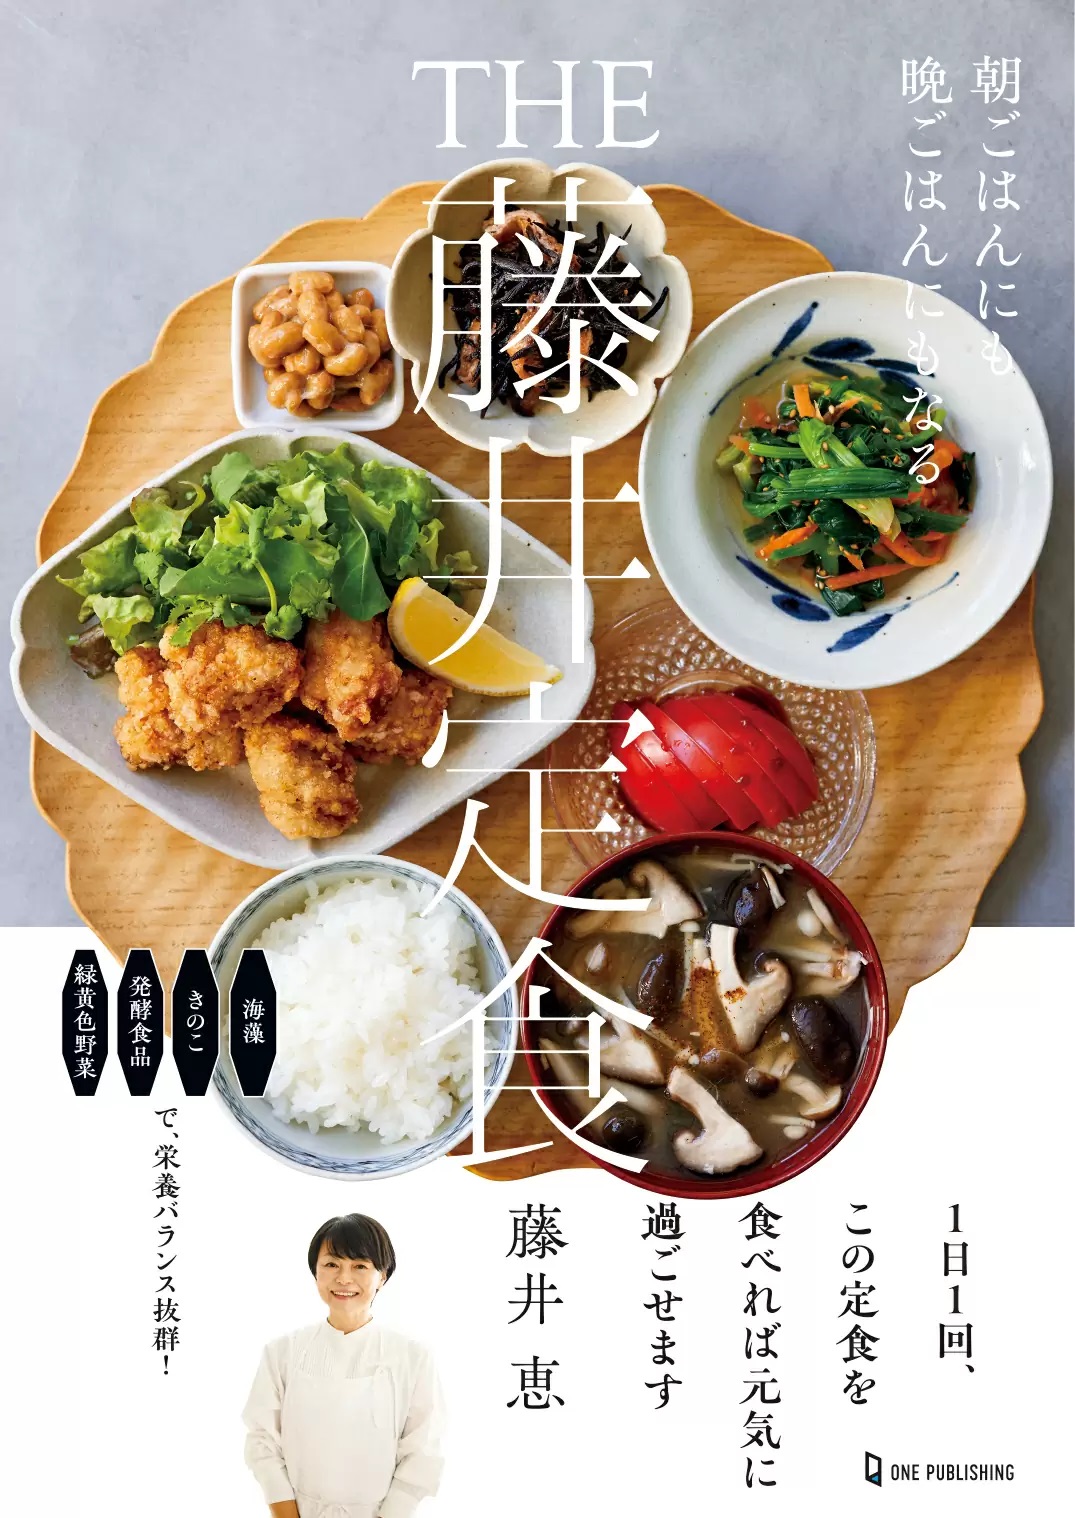 THE 藤井定食の書影